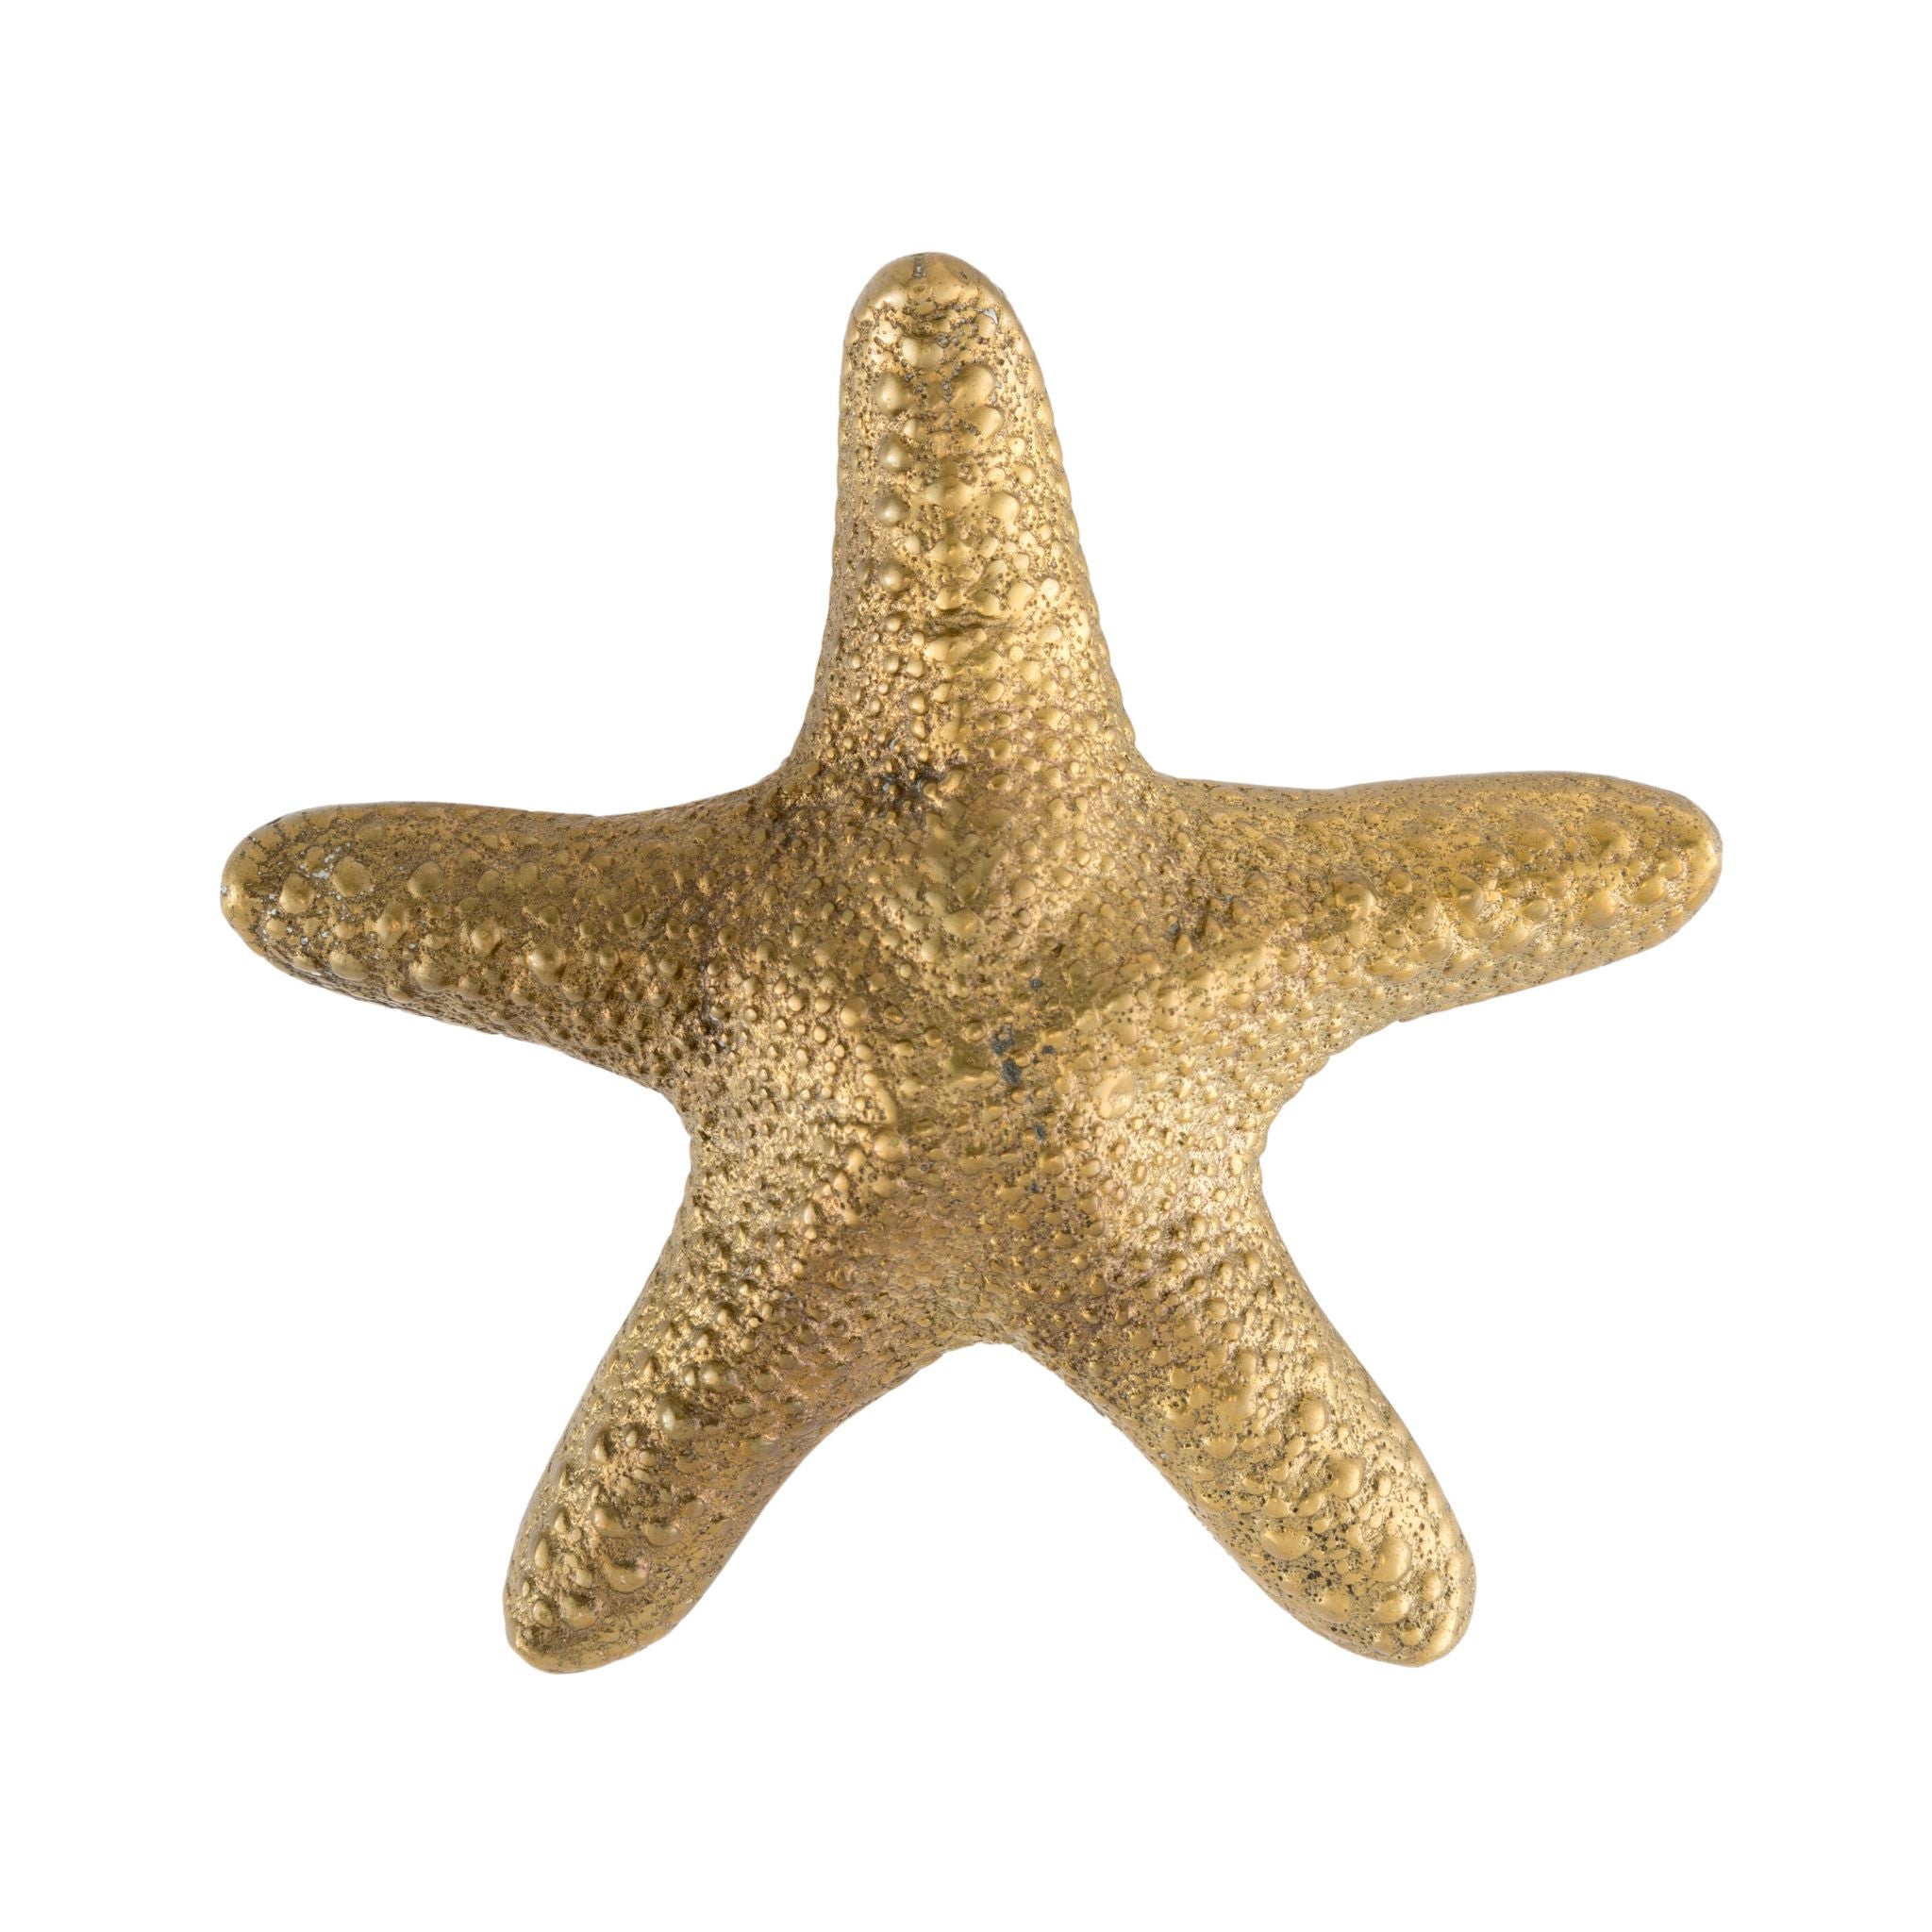 Close-up of a small starfish knob shaped like a starfish, with intricate detailing and a polished finish, perfect for enhancing cabinets, drawers, and doors with a touch of coastal elegance.